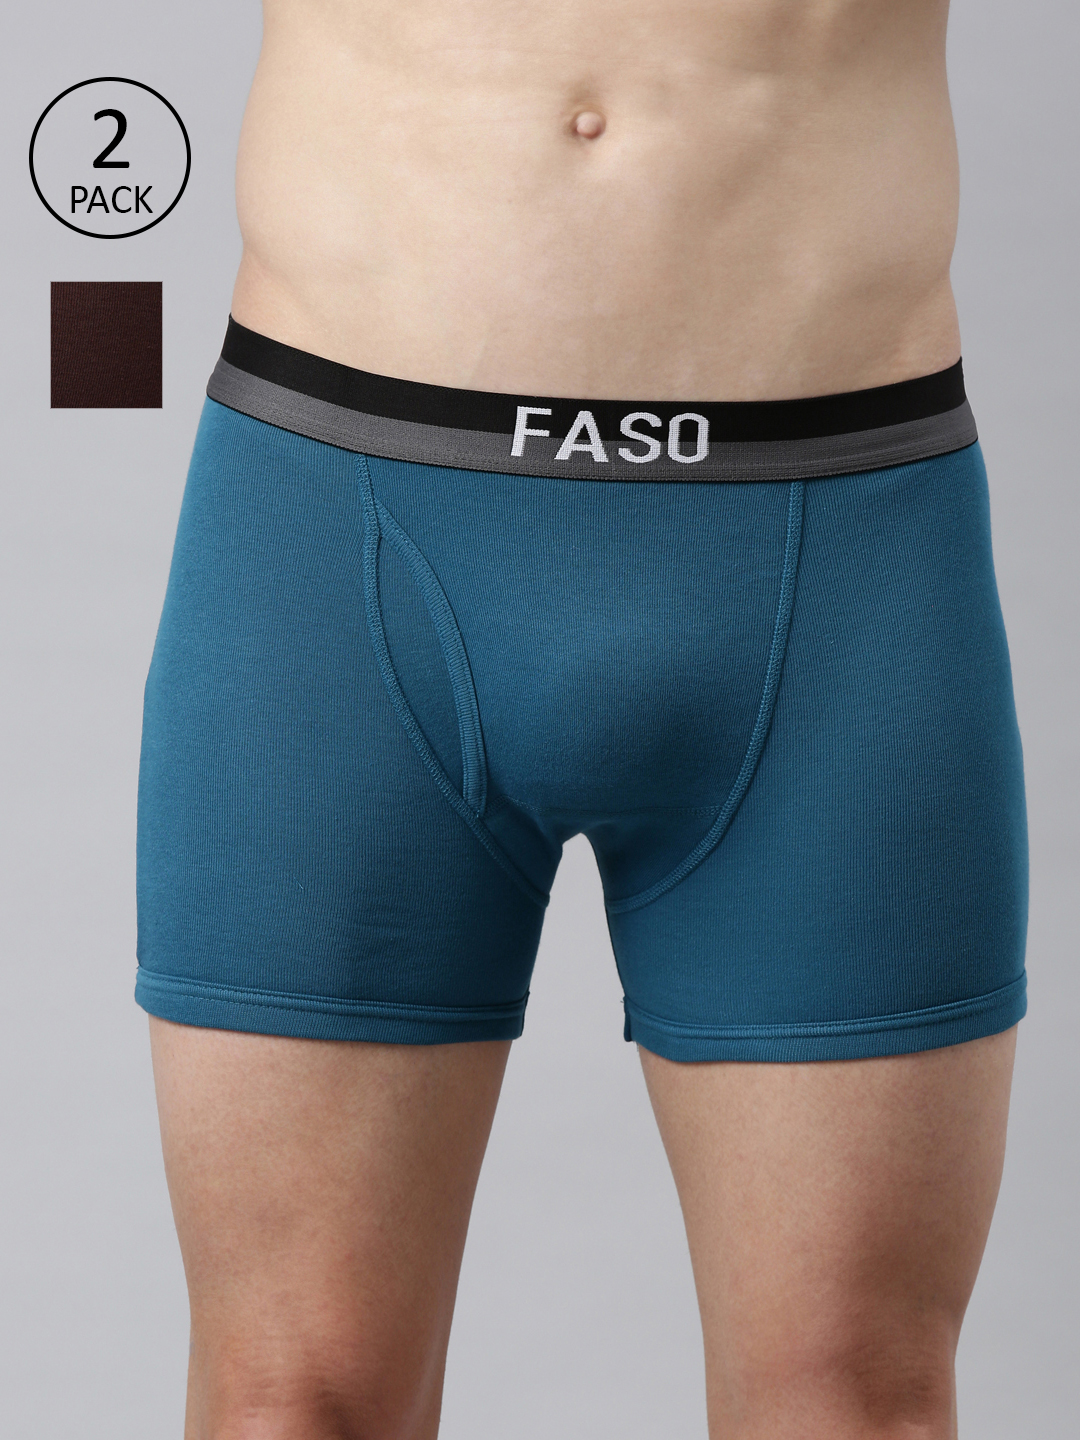 Buy FASO Outer Eastic Briefs at the Best Price in India